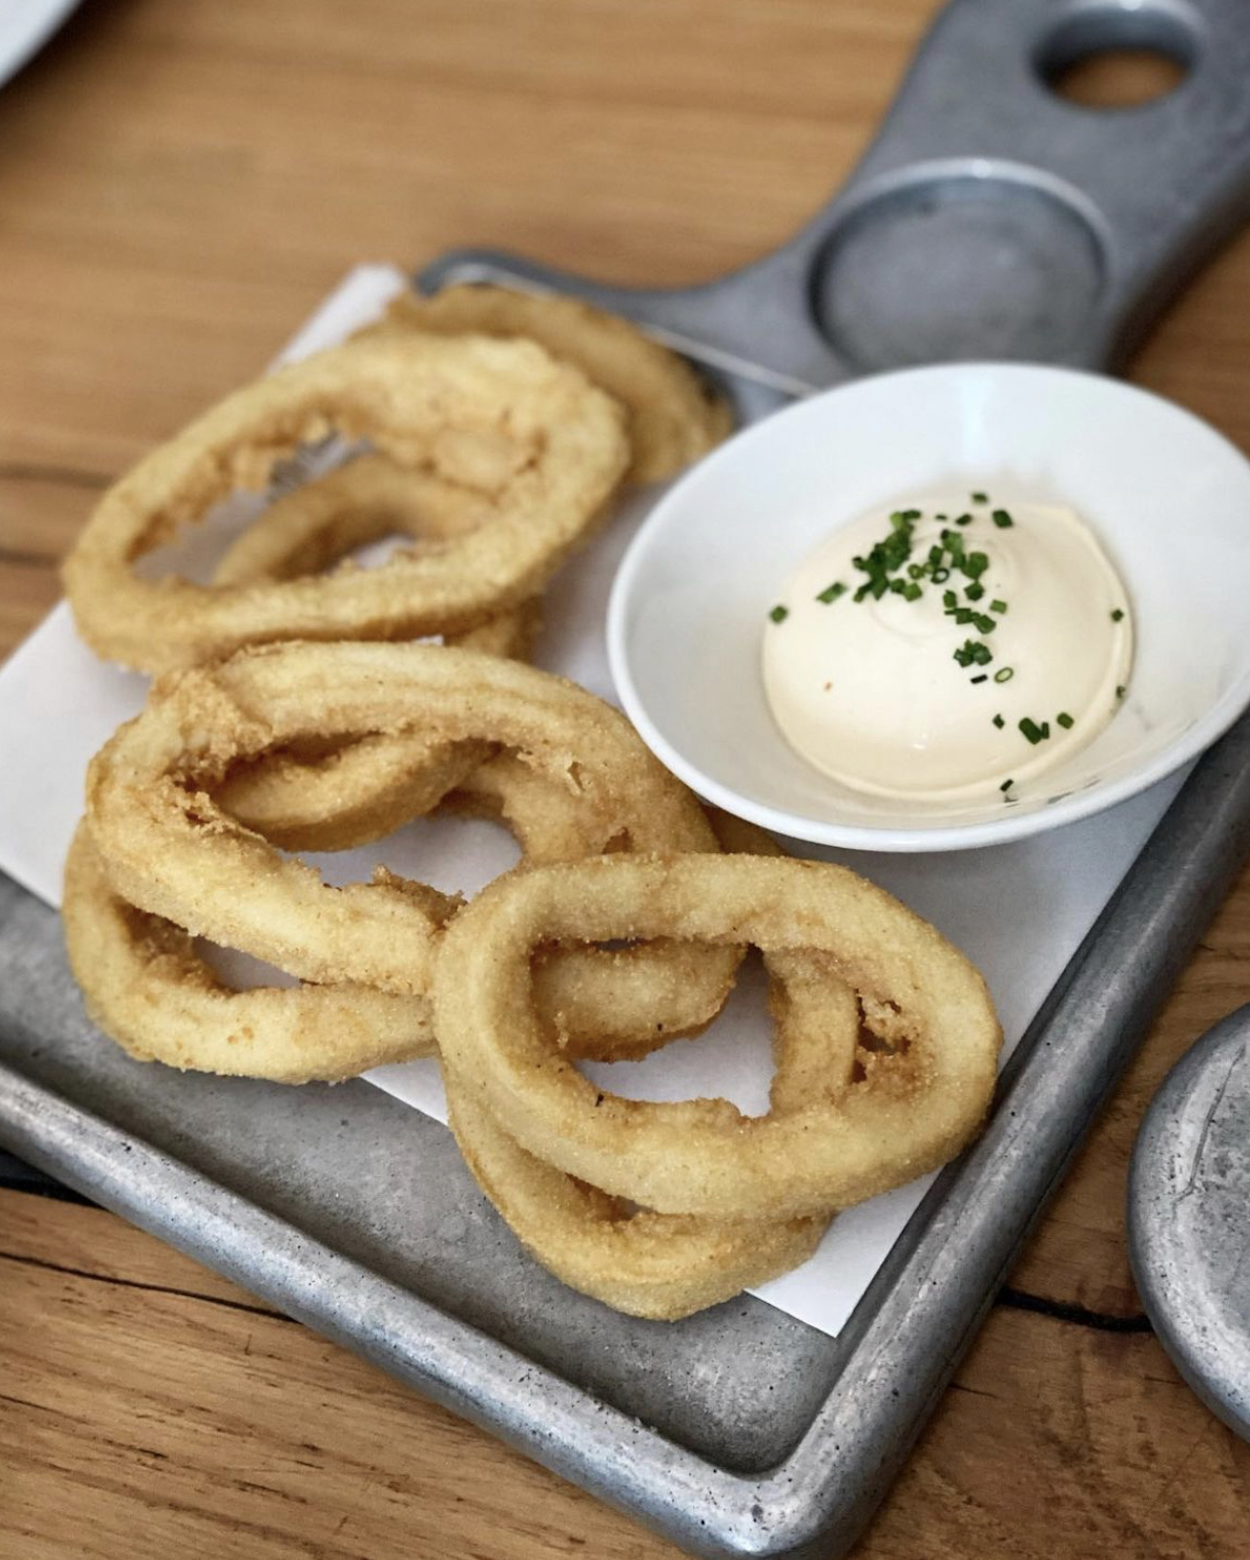 Fried squid with citrus mayonnaise